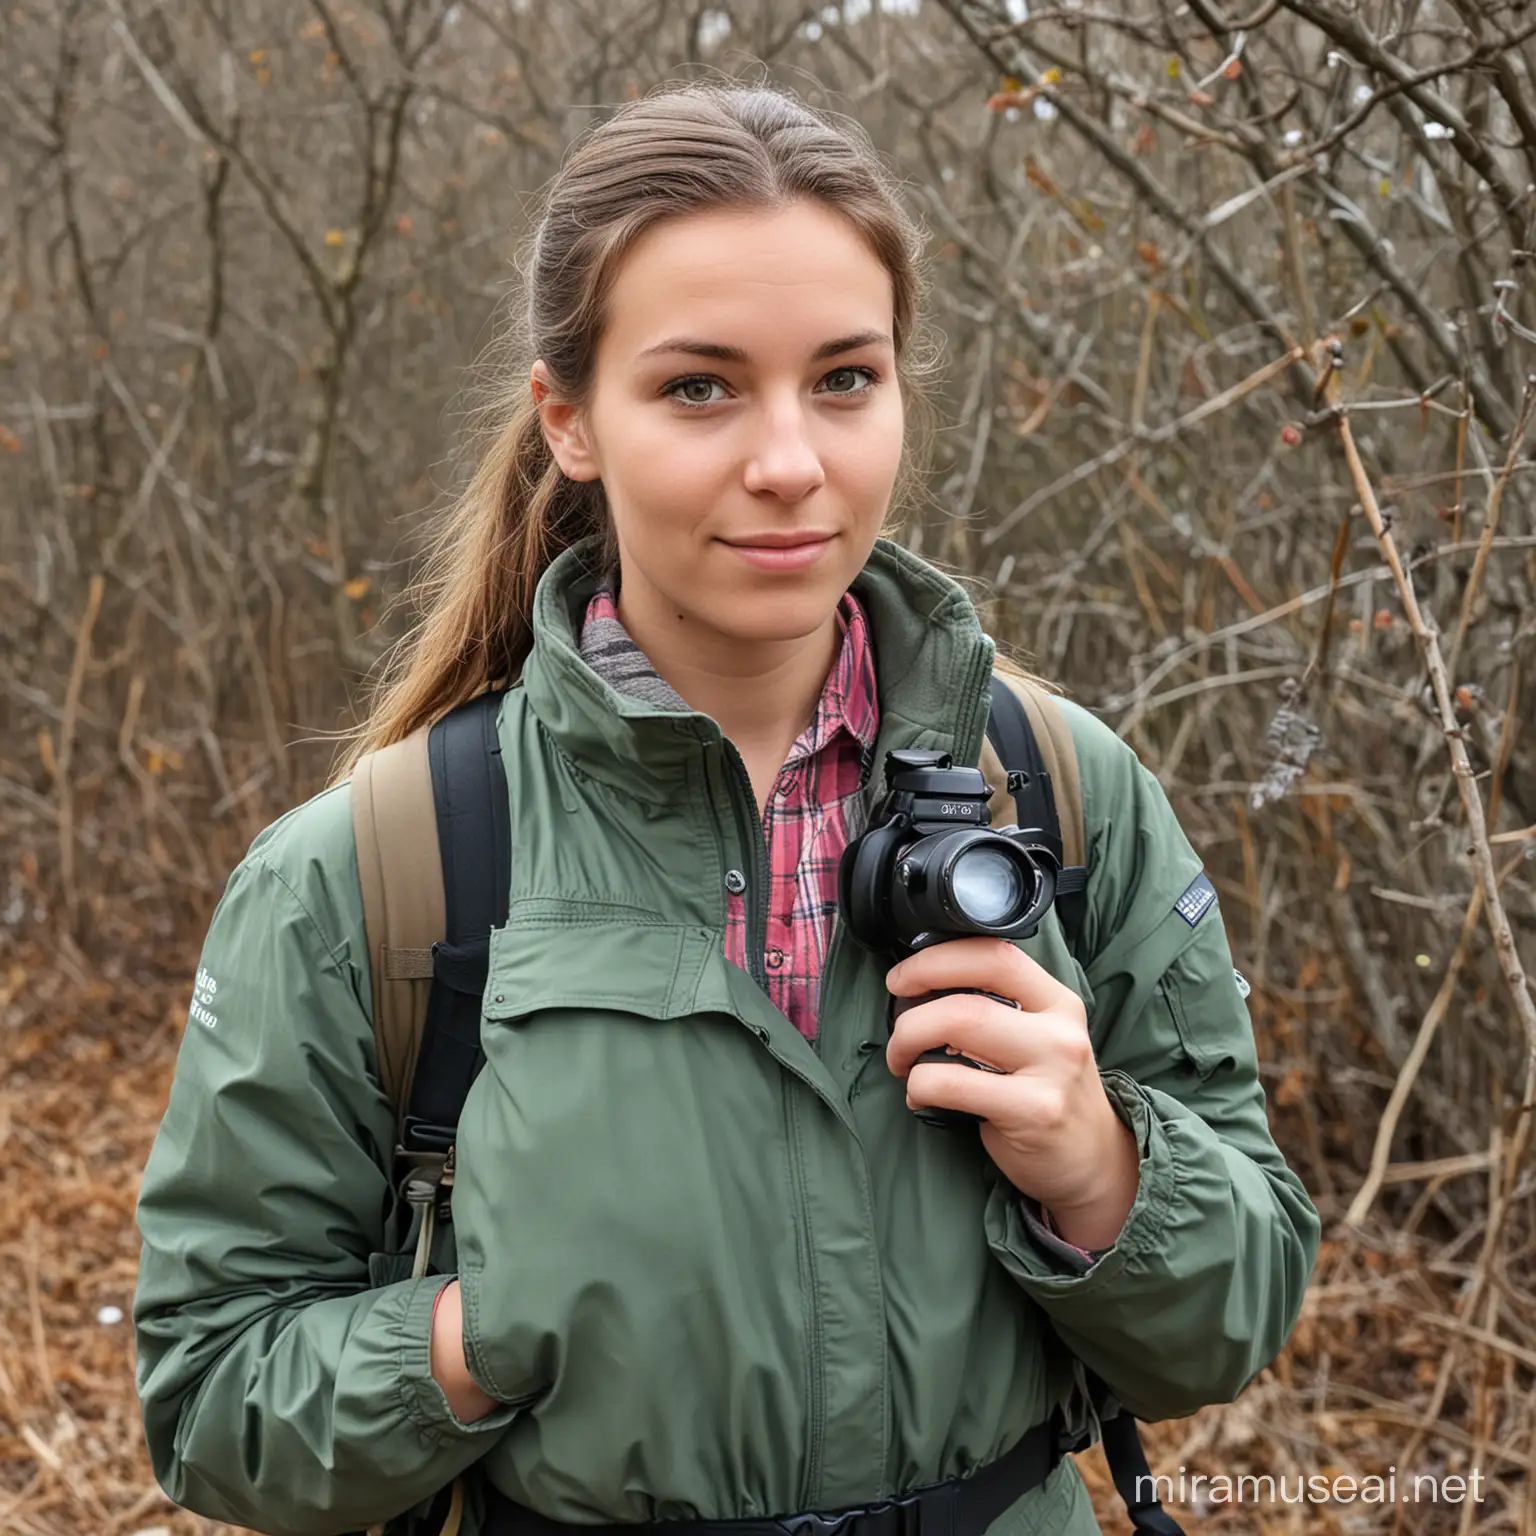 Young Woman Engaged in Bird Watching Adventure